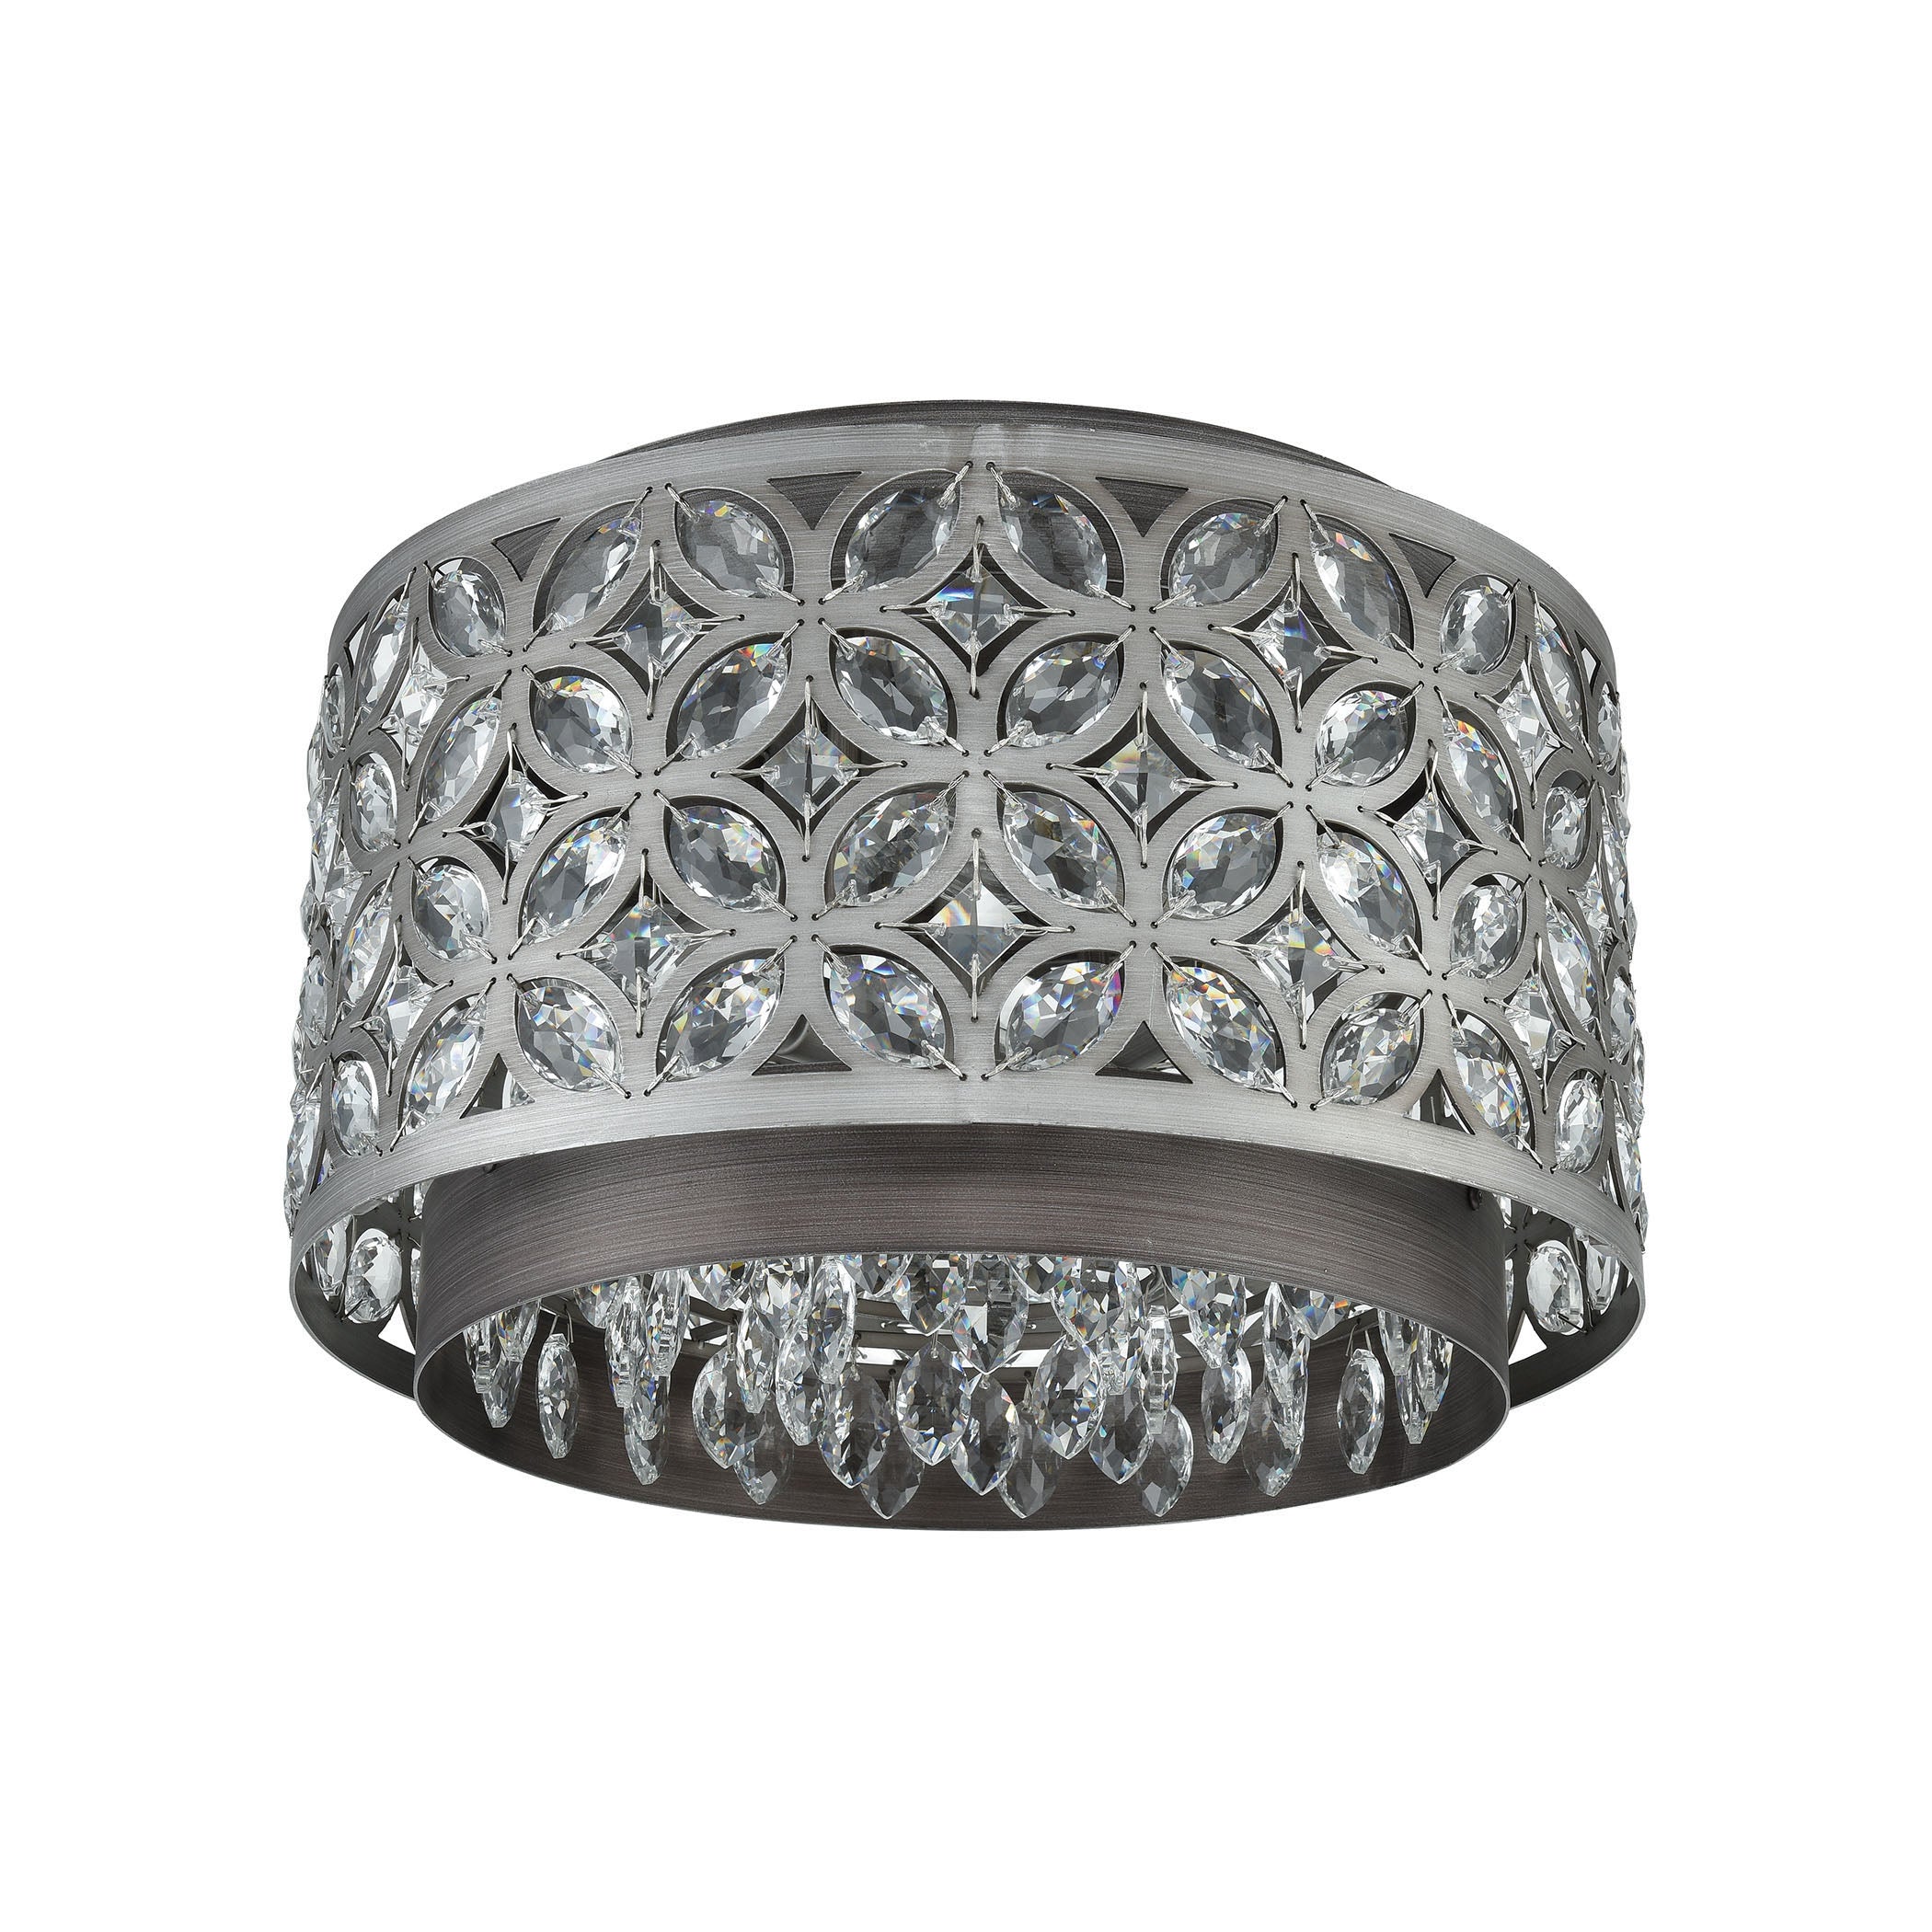 ELK Lighting 12161/4 Rosslyn 4-Light Flush Mount in Weathered Zinc and Matte Silver with Crystal and Metalwork Shade